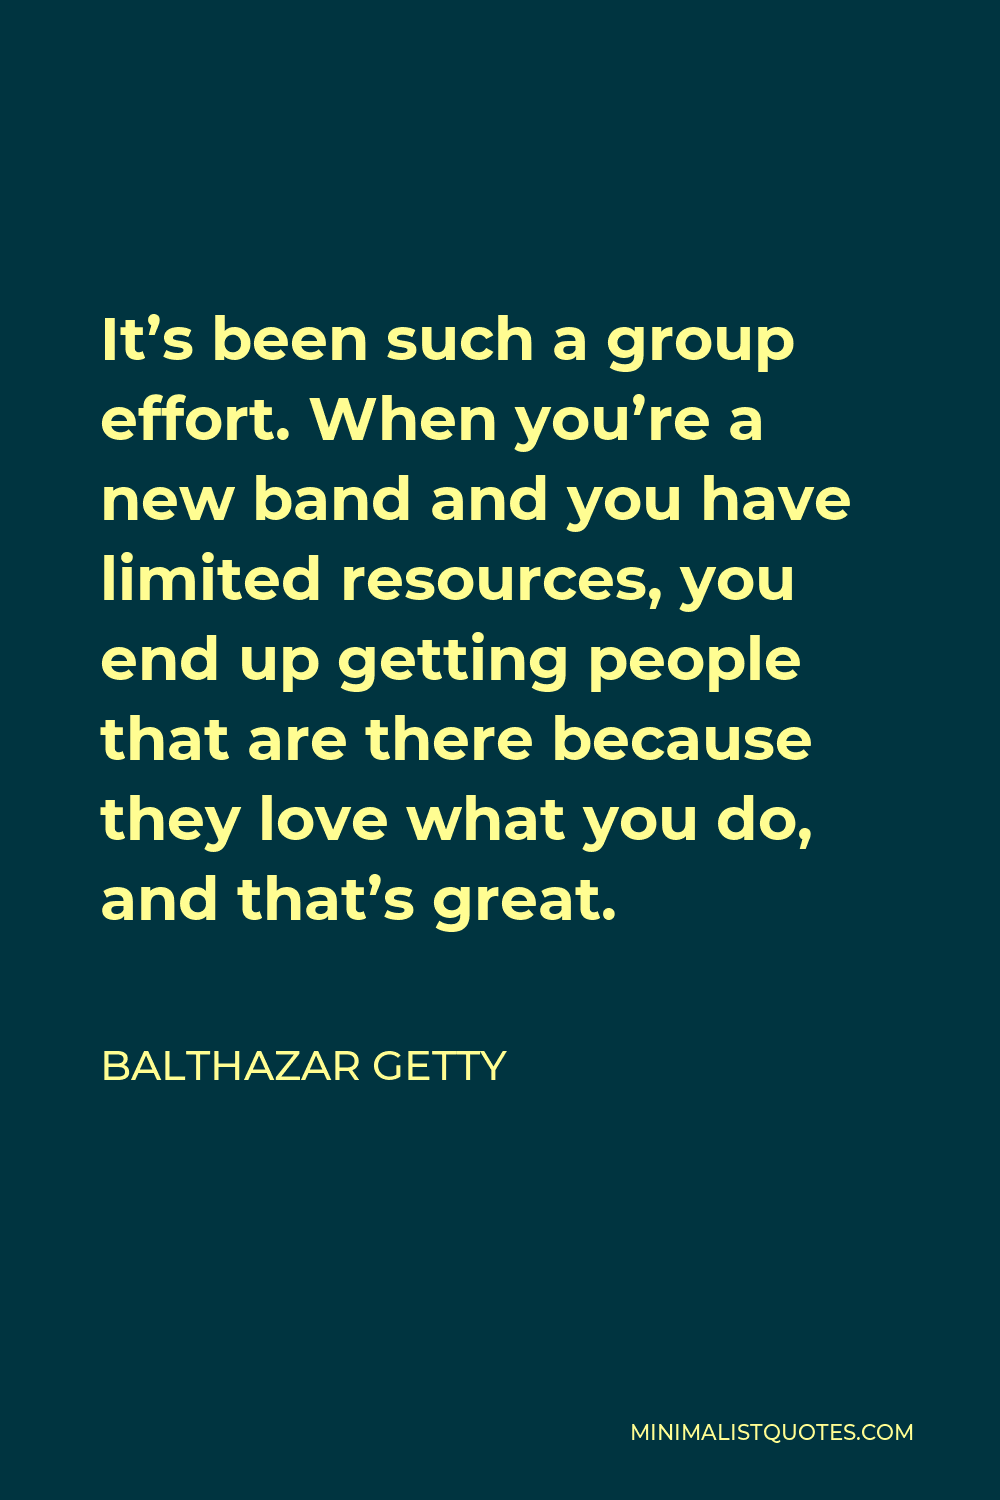 Balthazar Getty Quote - It’s been such a group effort. When you’re a new band and you have limited resources, you end up getting people that are there because they love what you do, and that’s great.